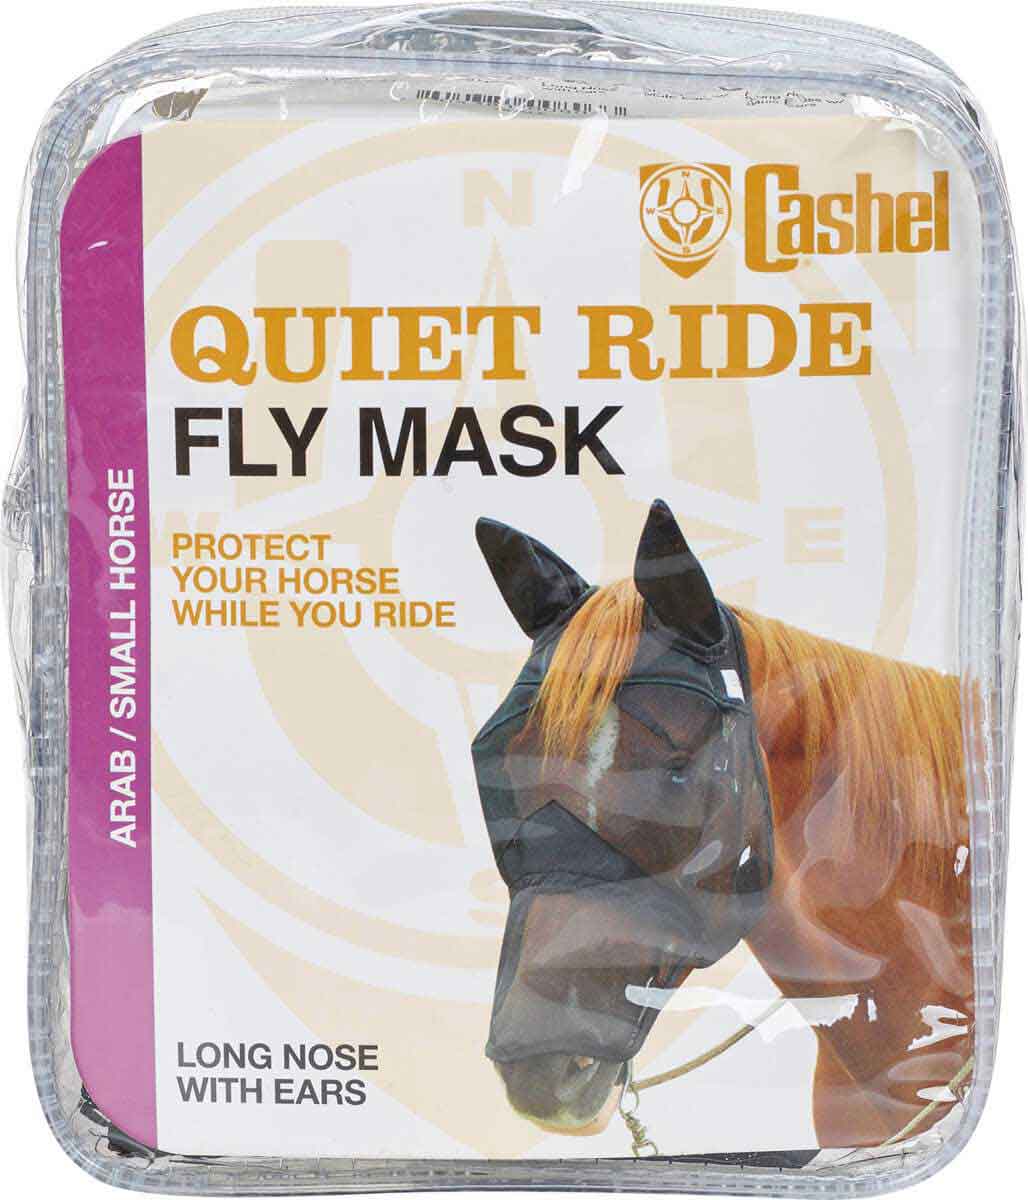 CASHEL FLY MASK CRUSADER DRAFT QUIET RIDE STANDARD RIDING FOR TRAIL Horse Tack 